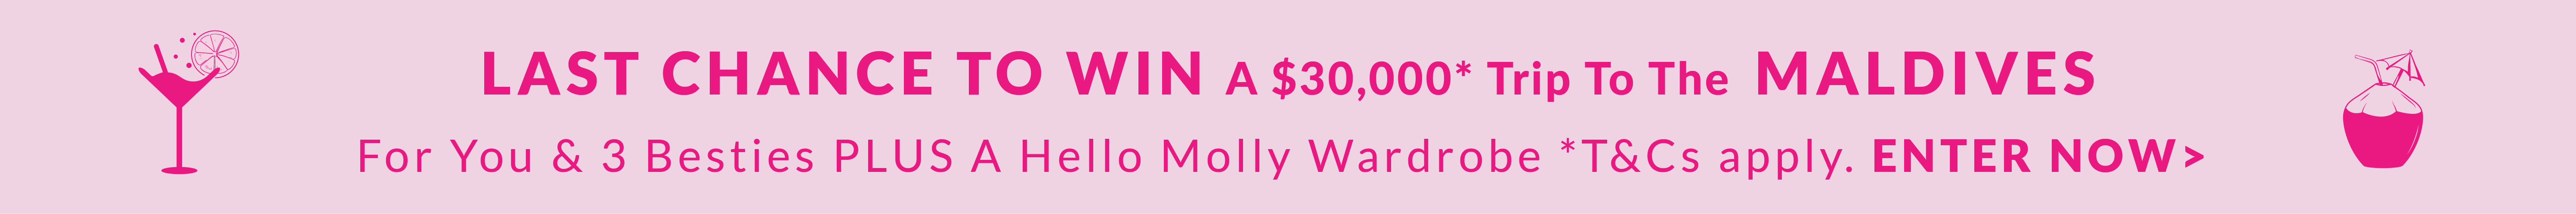 LAST CHANCE TO WIN A $30,000 TRIP TO THE MALDIVES FOR YOU & 3 BESTIES PLUS A HELLO MOLLY WARDROBE